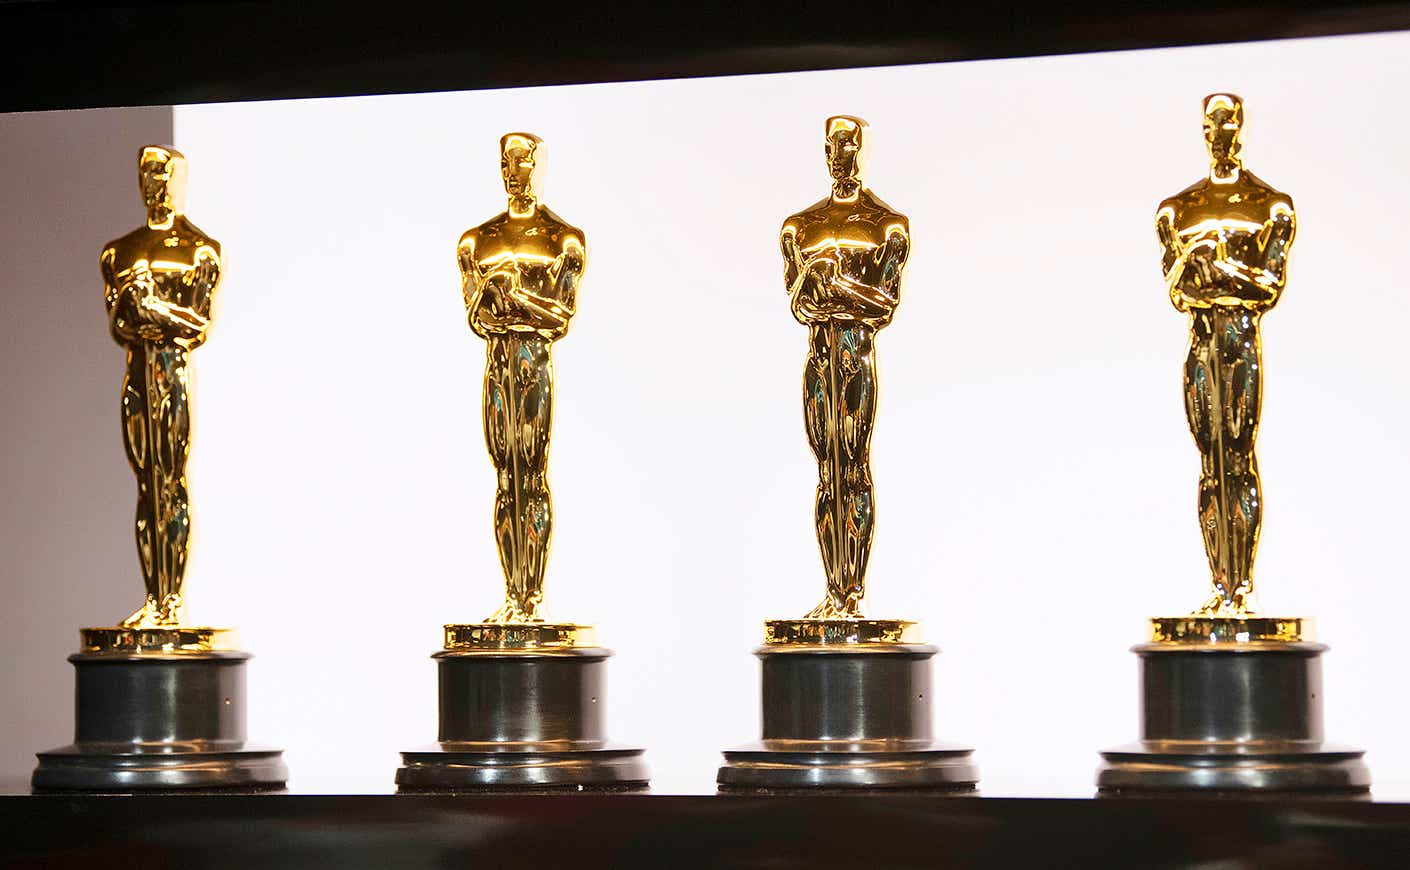 Oscar Nominations 2021: See the Full List